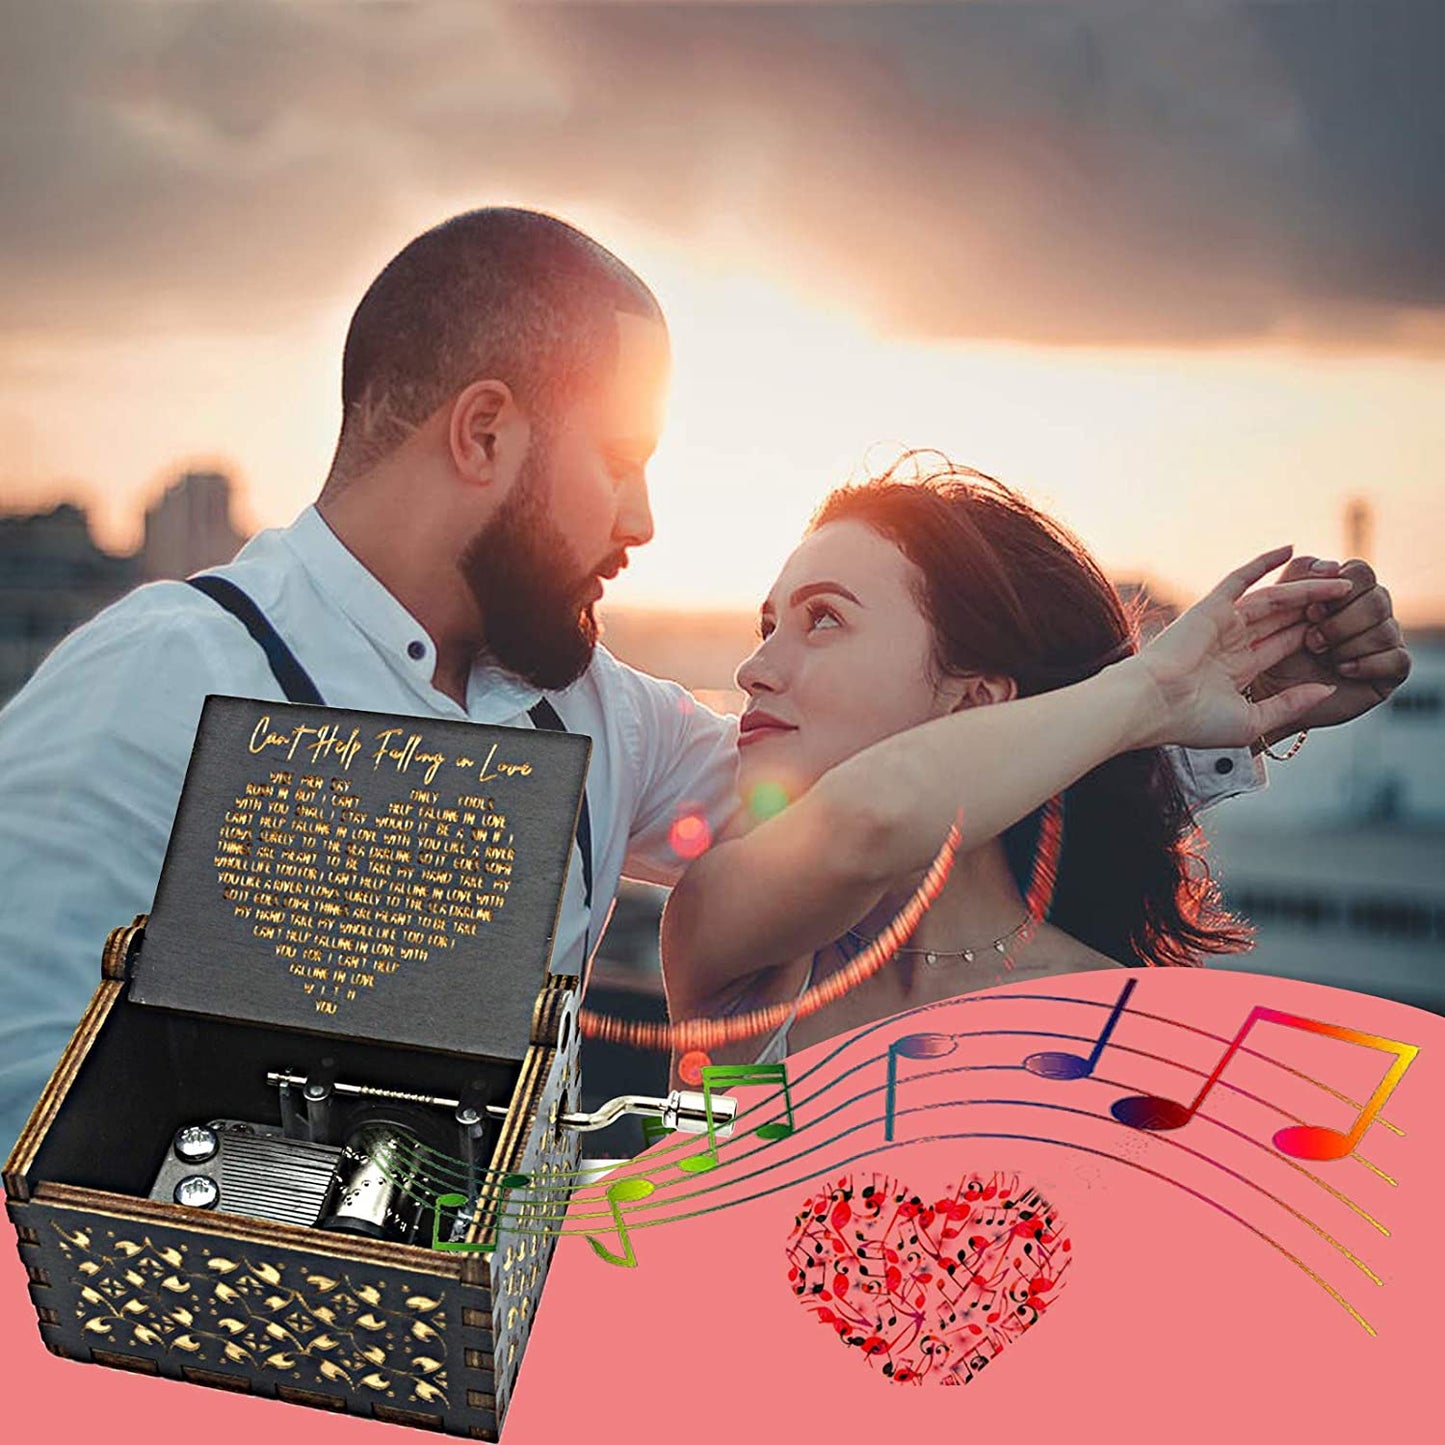 A couple are dancing at dusk and there is an old fashioned crank style music box photoshopped onto the image of the couple.